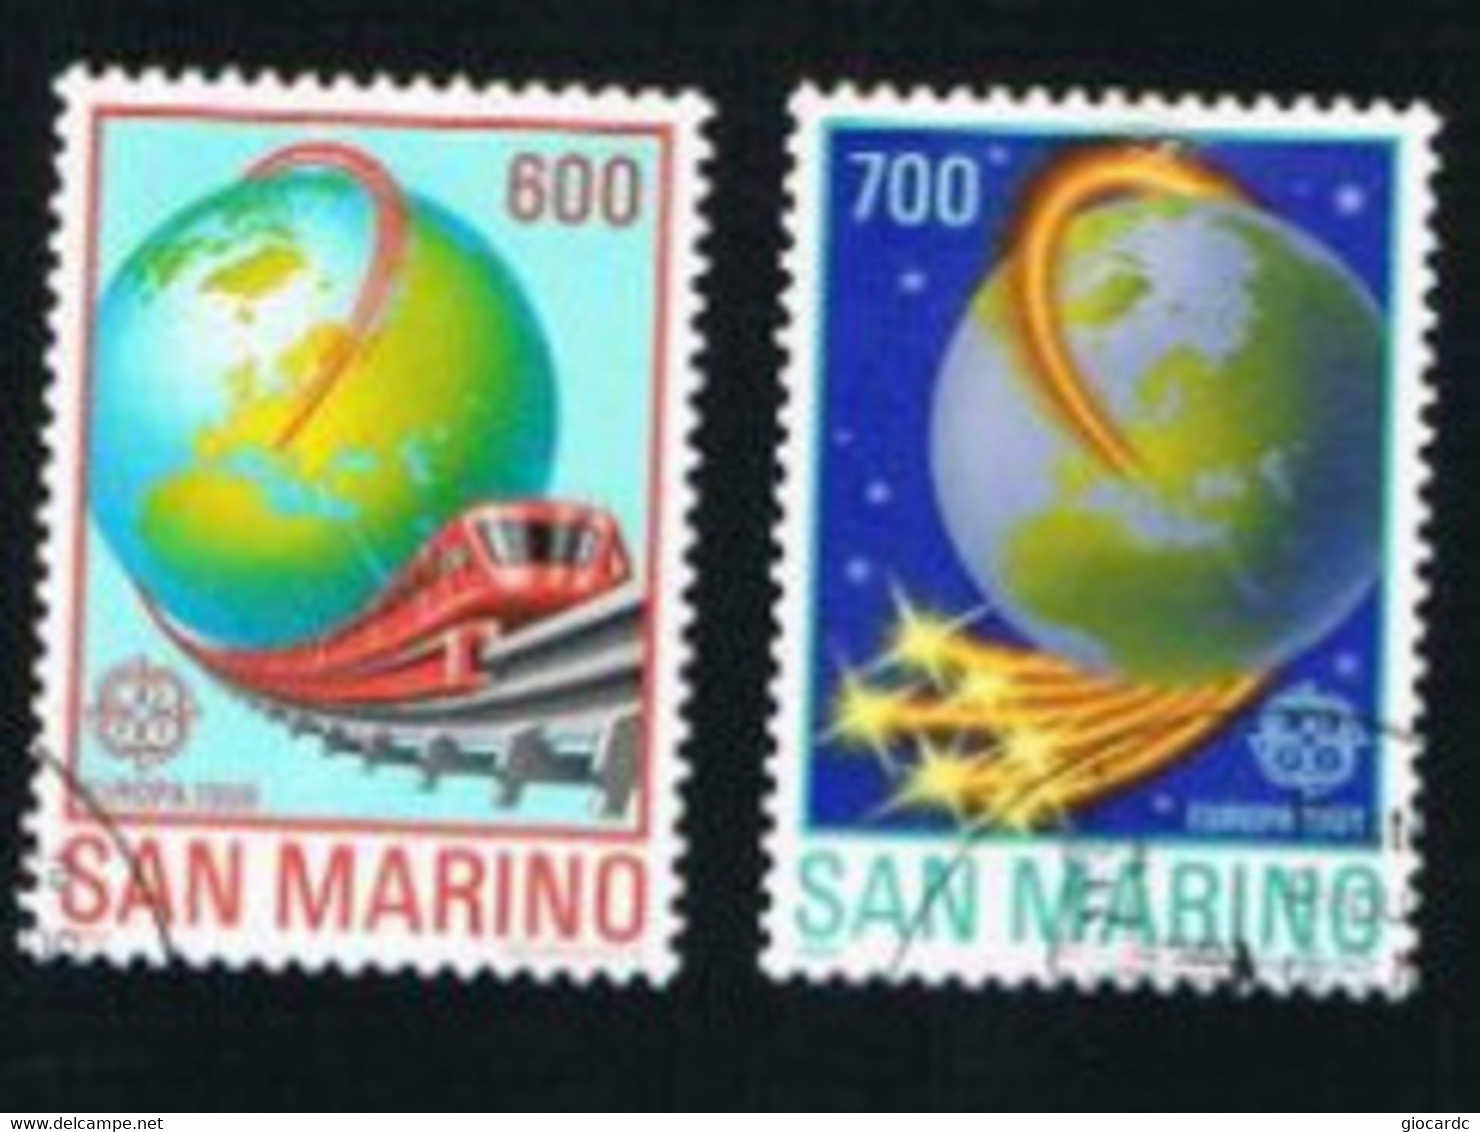 SAN MARINO - UNIF. 1221.1222 - 1988  EUROPA    (COMPLET SET OF2) - USED° - Used Stamps